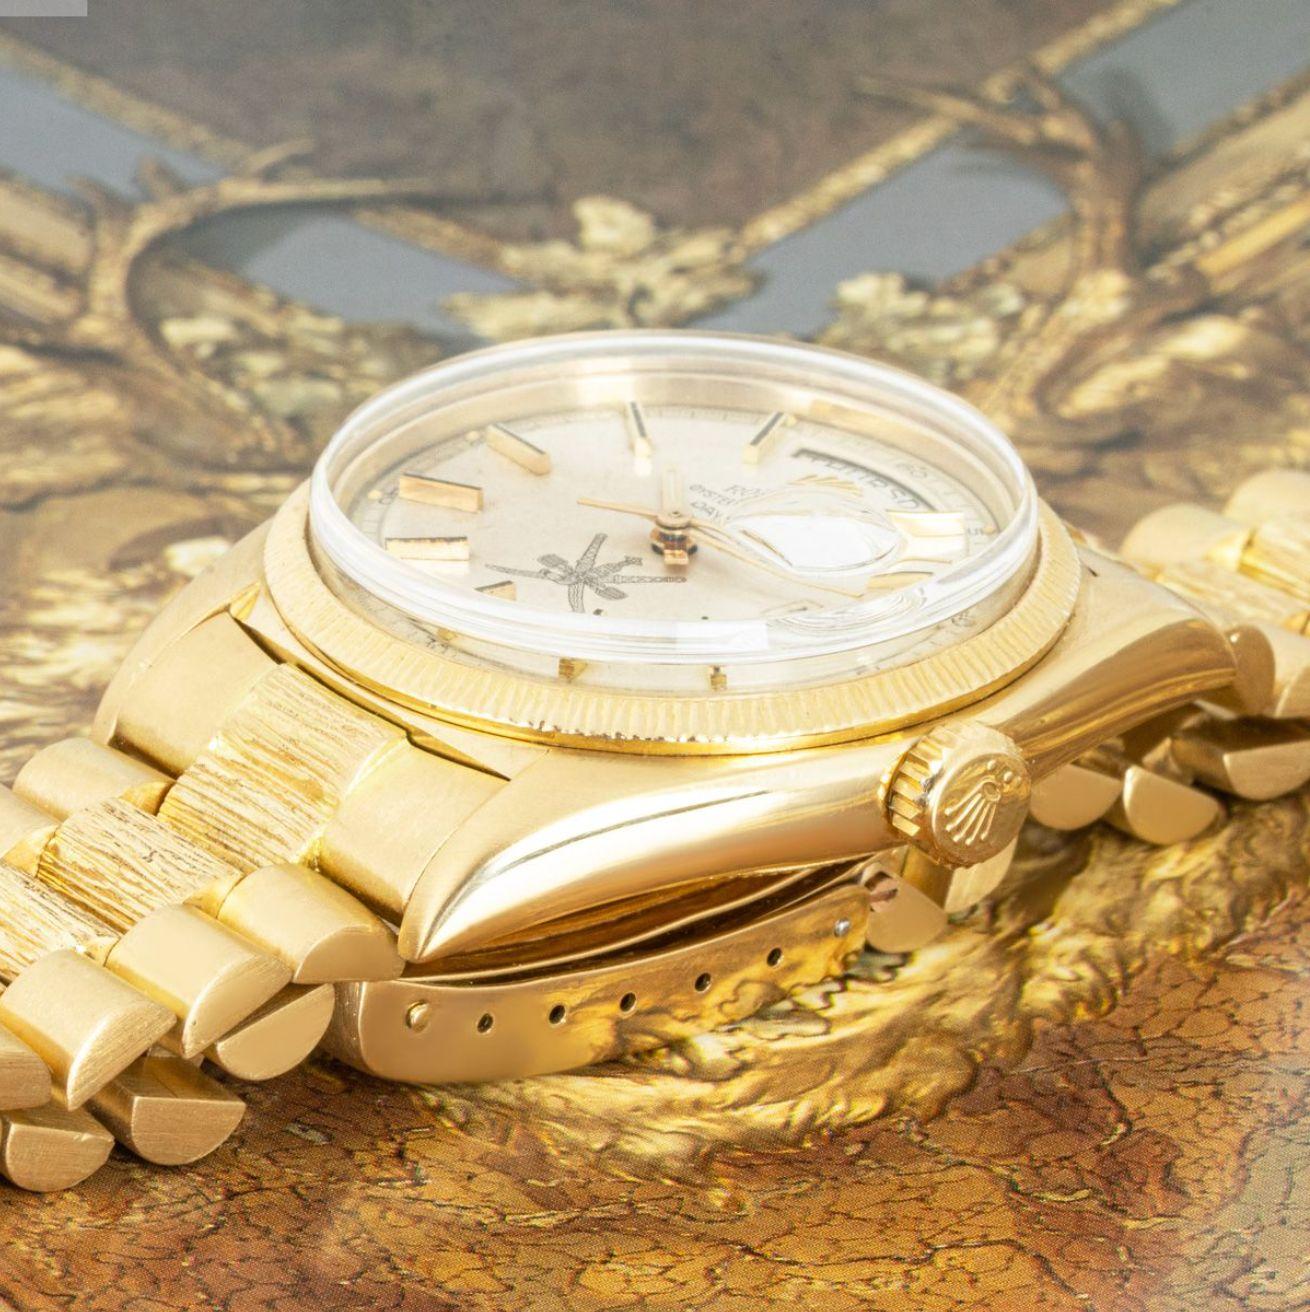 A 18k yellow gold Day-Date wristwatch by Rolex. Featuring a silver dial with applied hour markers, an Omani crest at 6 o'clock, representing the national emblem of Oman and a yellow gold bark finish bezel.

Fitted with a plastic glass, a